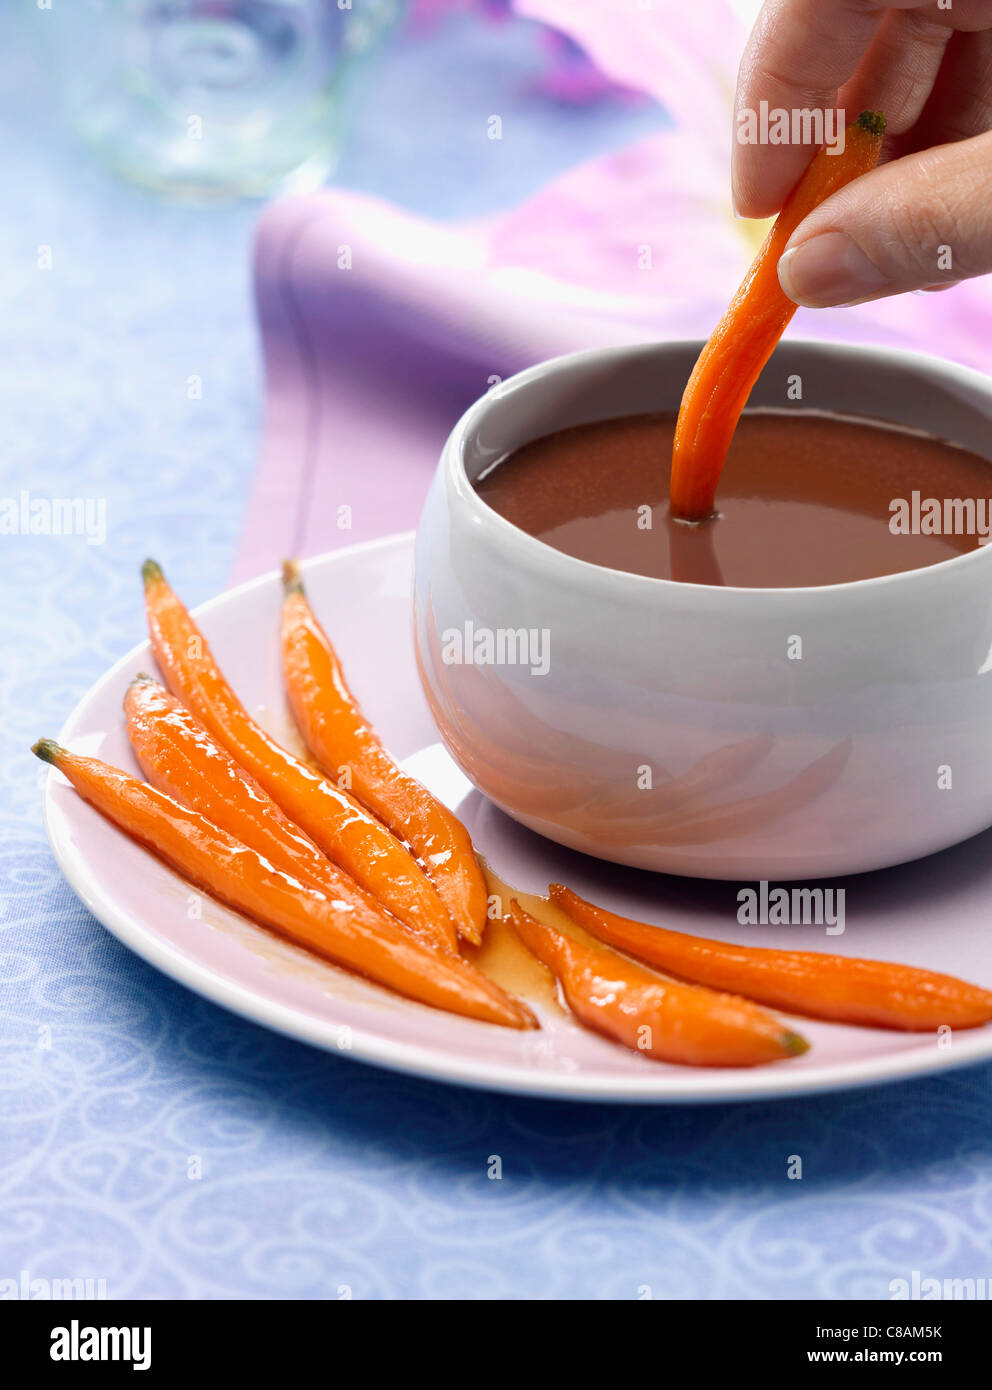 Mini carrots dipped in chocolate sauce Stock Photo